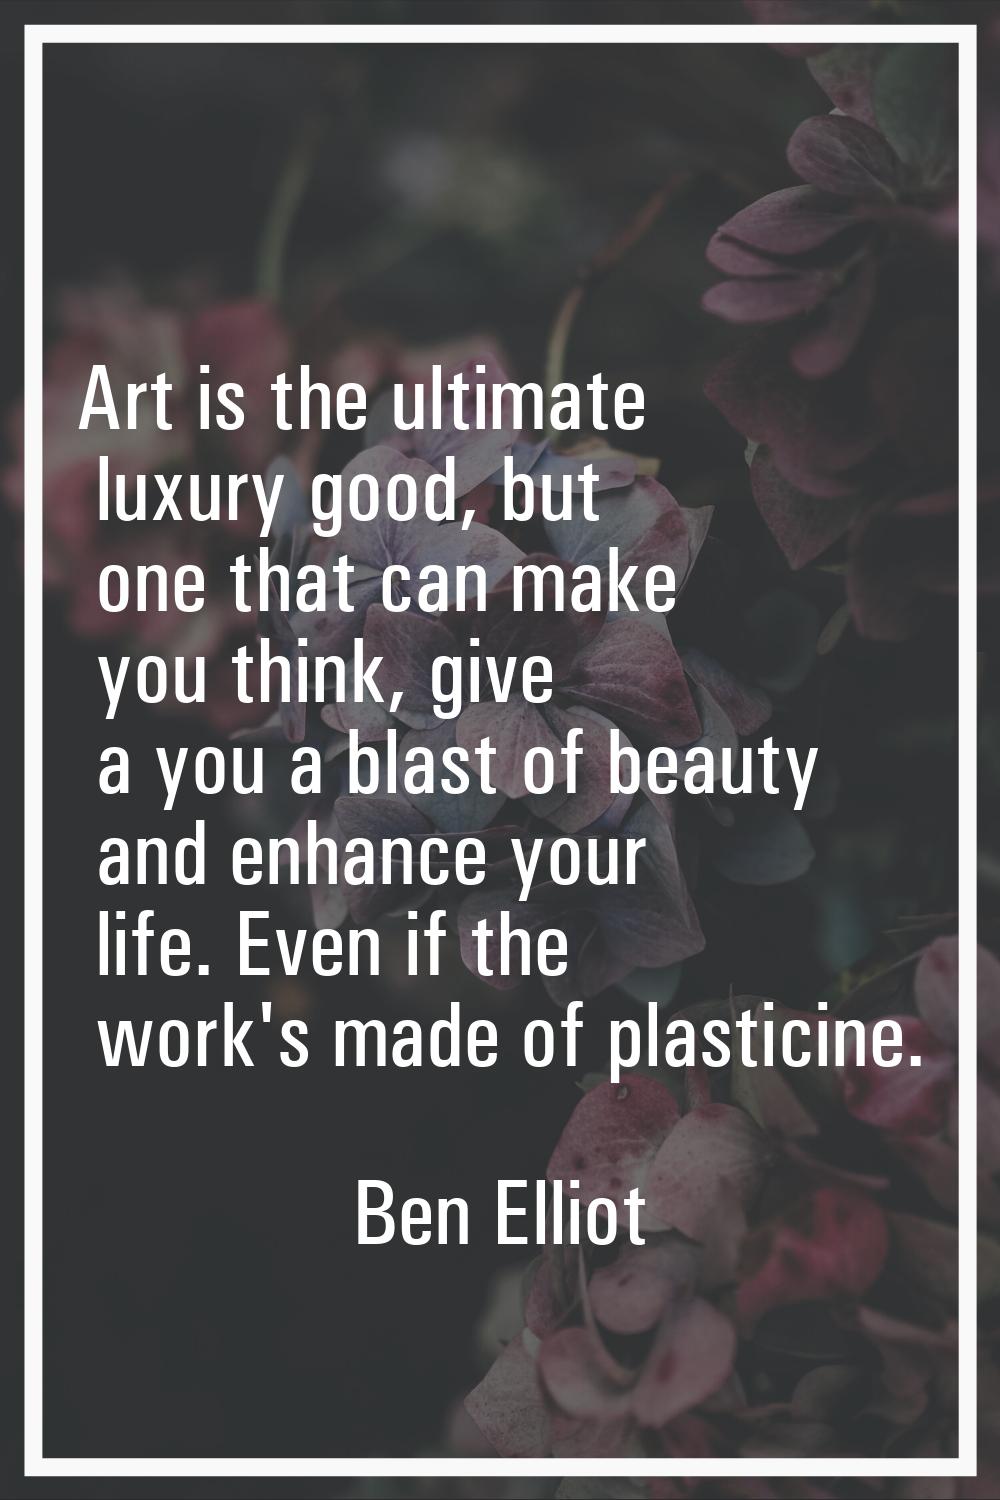 Art is the ultimate luxury good, but one that can make you think, give a you a blast of beauty and 